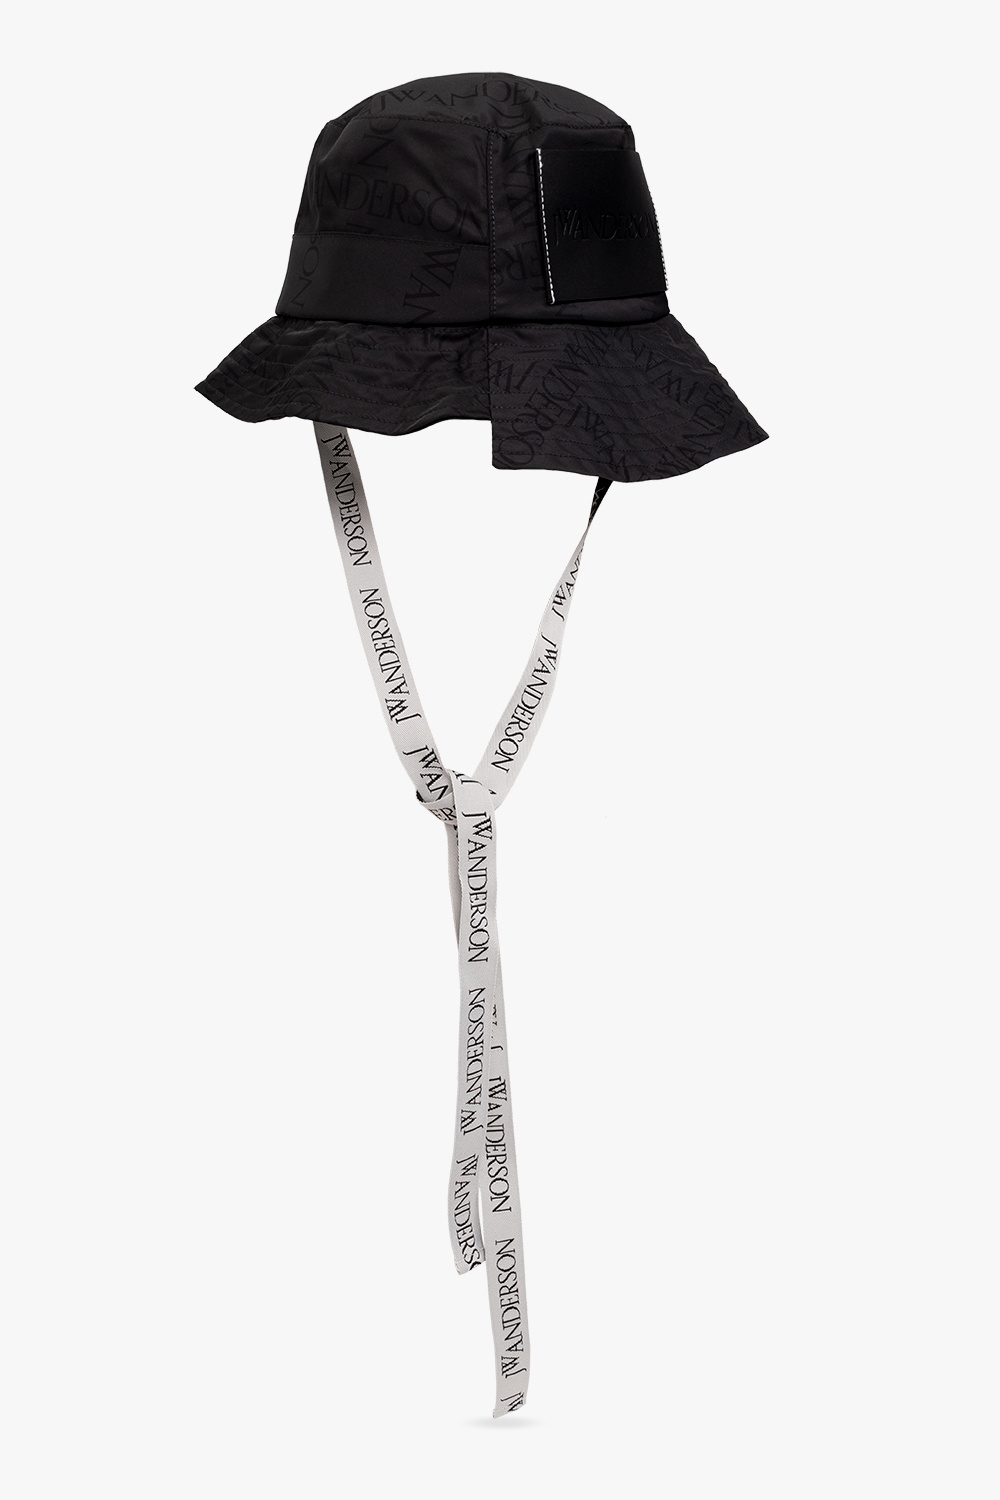 JW Anderson Bucket hat box with logo